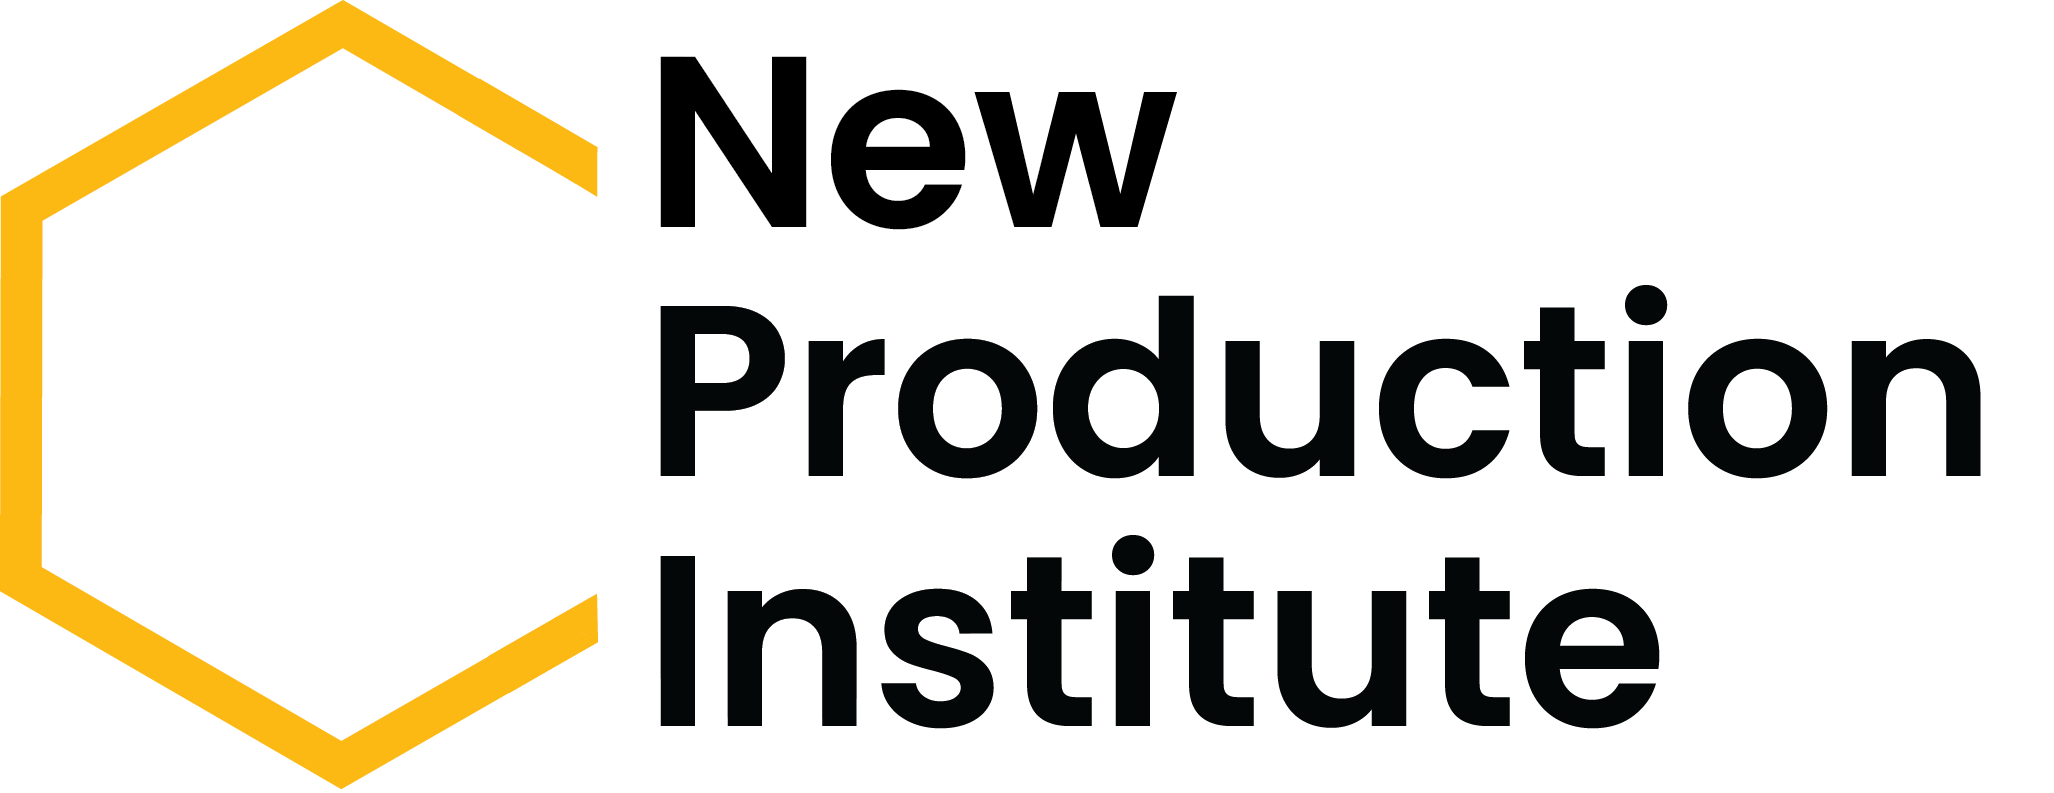 The New Production Institute